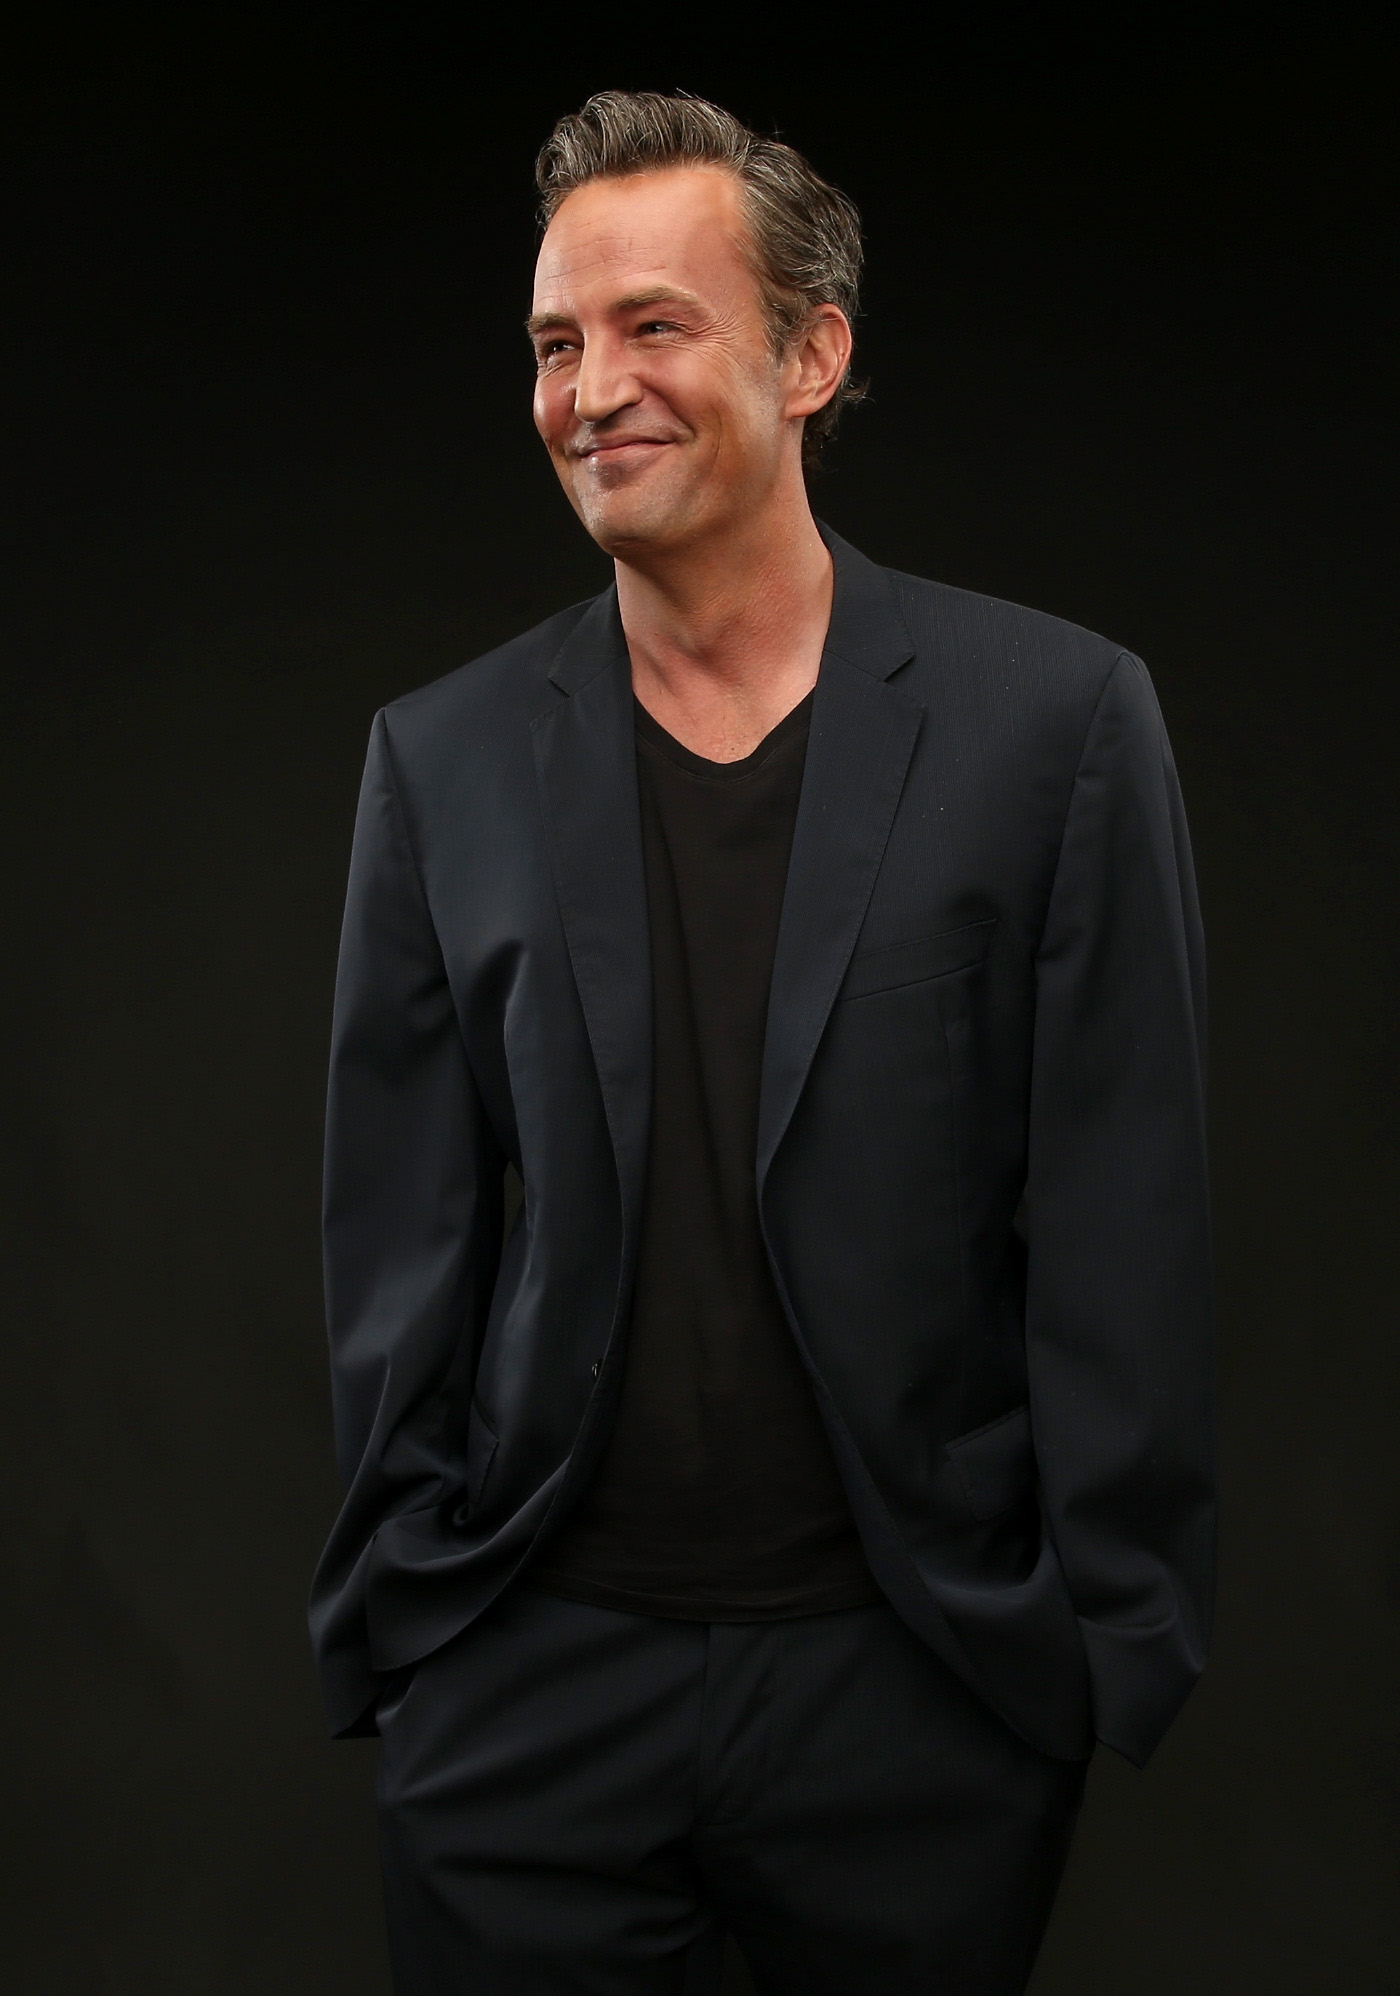 Matthew Perry poses for a portrait during CBS' Summer TCA tour in Beverly Hills, California, on July 17, 2014. | Source: Getty Images